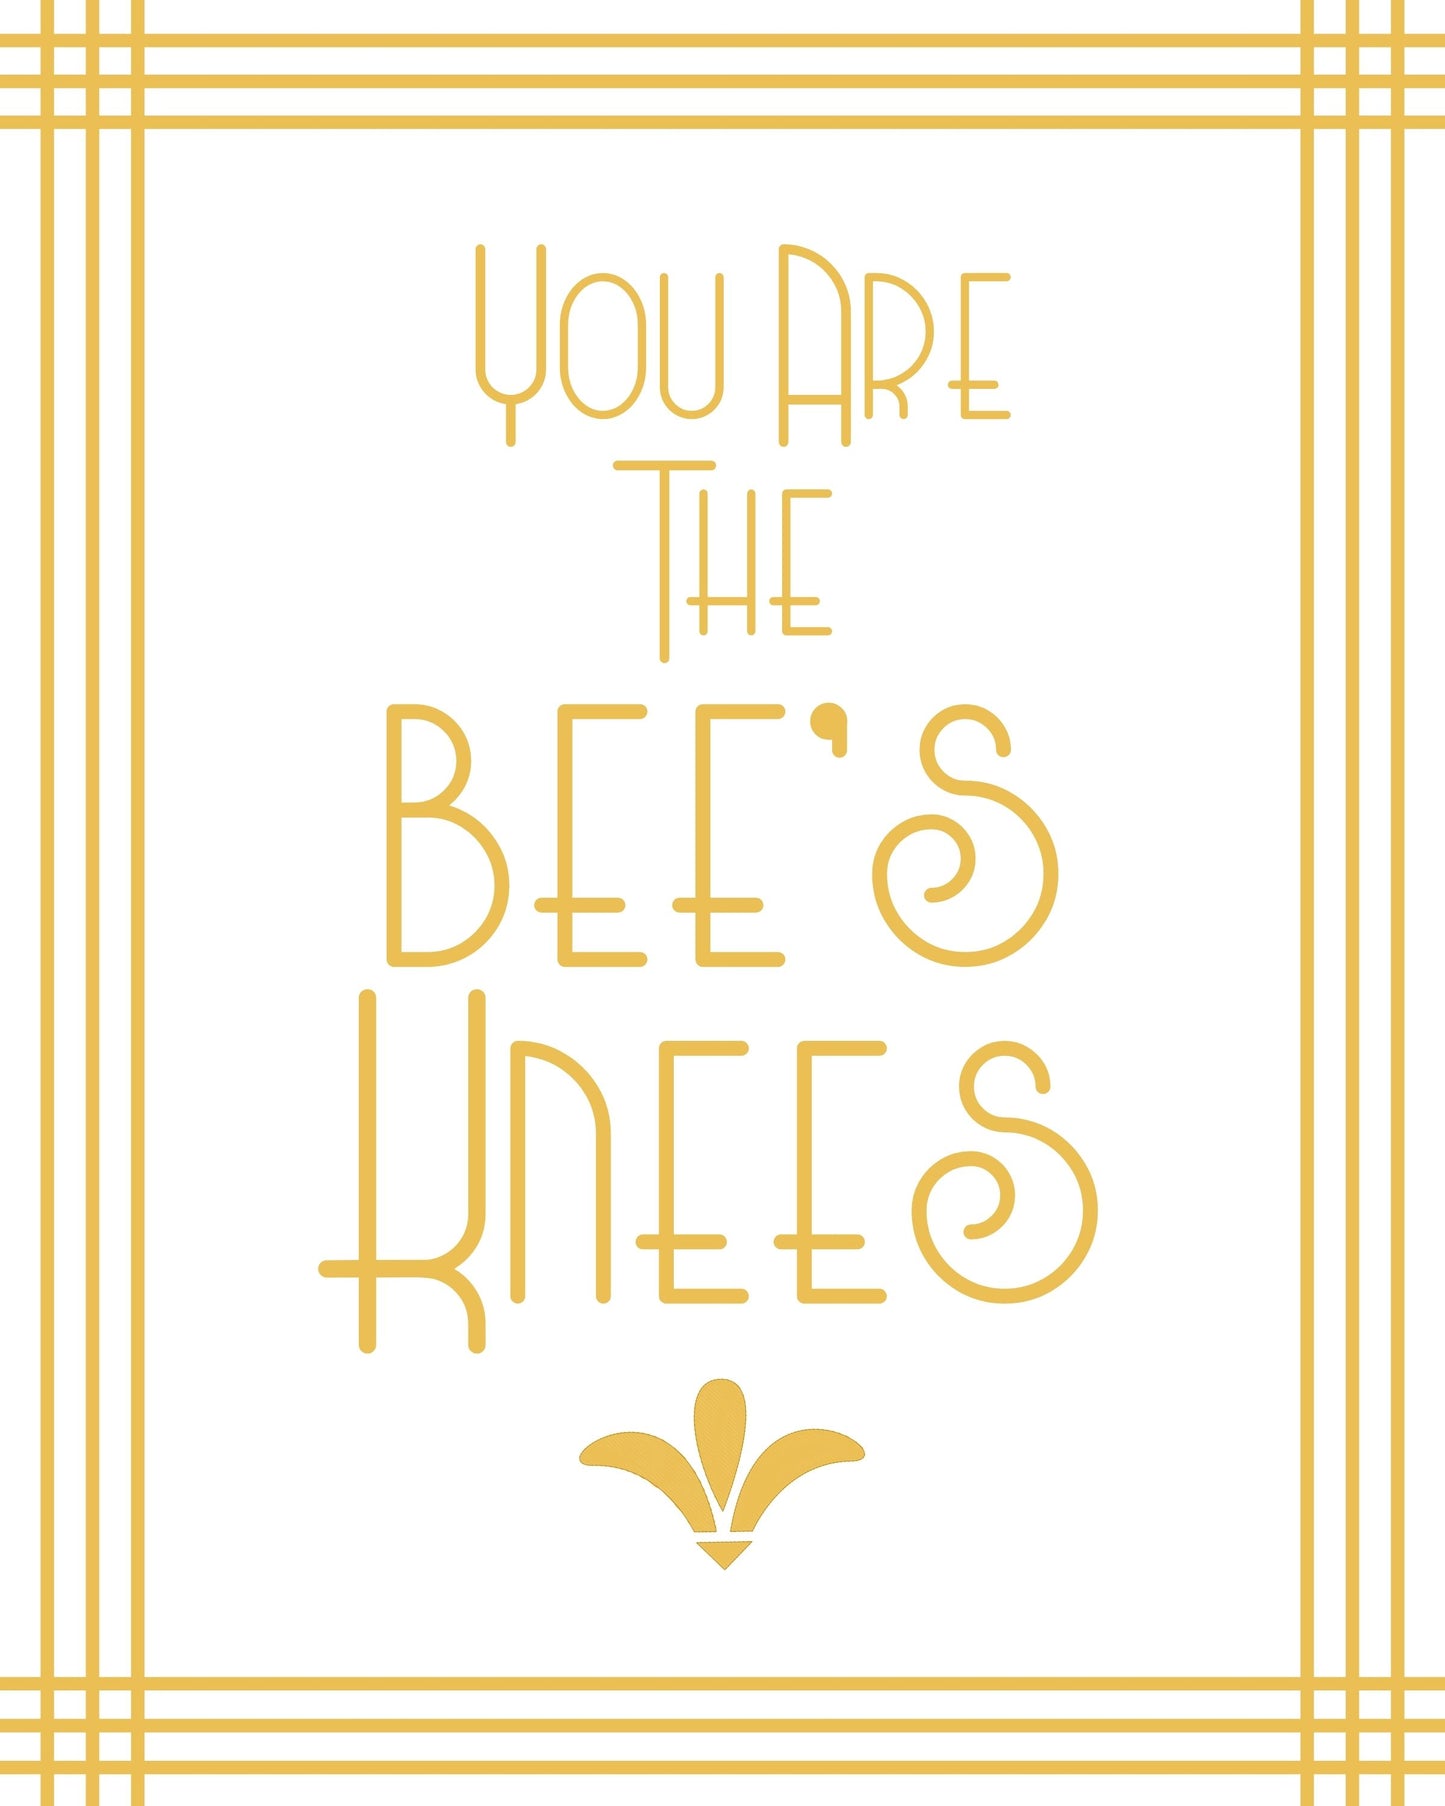 "You Are The Bee's Knees" Printable Party Sign For Great Gatsby or Roaring 20's Party Or Wedding, White & Gold, Printable Party Decor